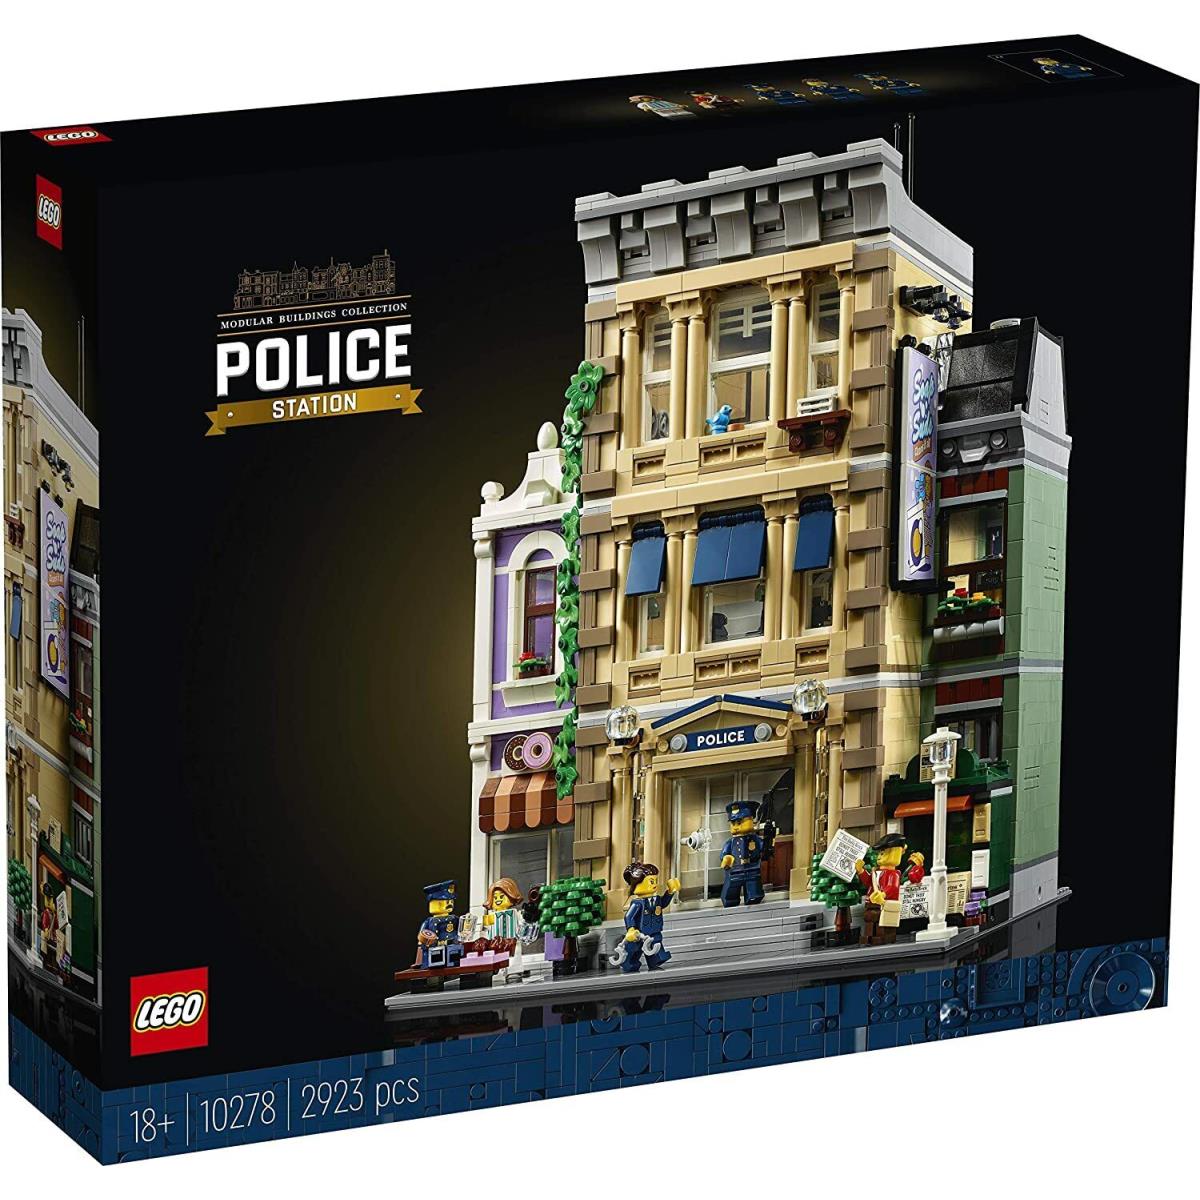 Lego Creator 10278 Police Station 2923 Pieces in Retail Box